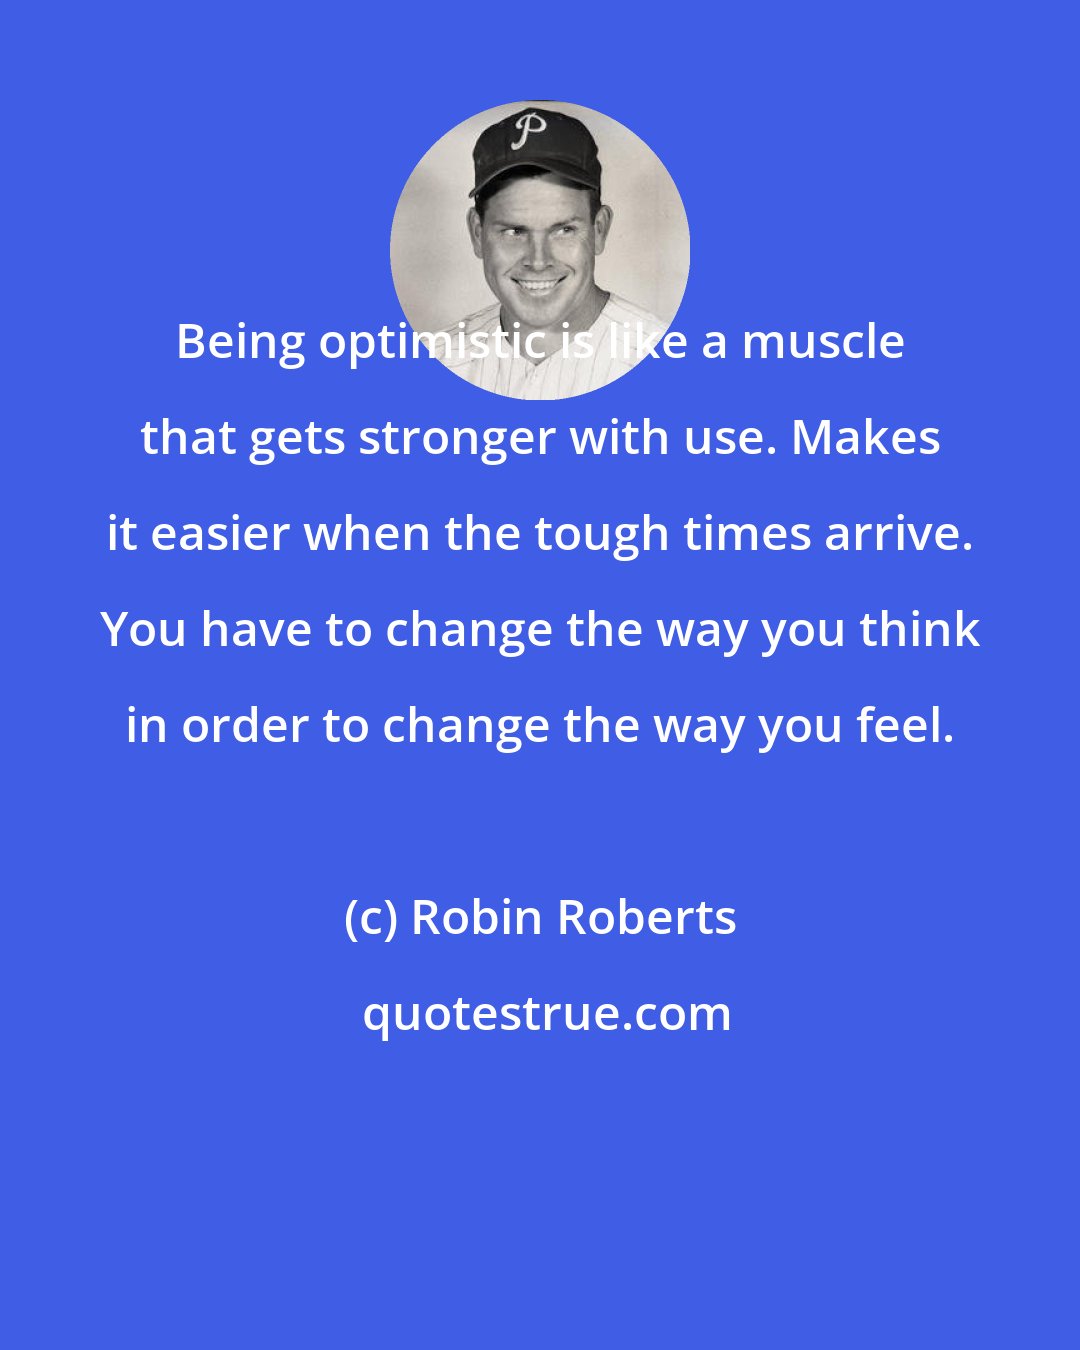 Robin Roberts: Being optimistic is like a muscle that gets stronger with use. Makes it easier when the tough times arrive. You have to change the way you think in order to change the way you feel.